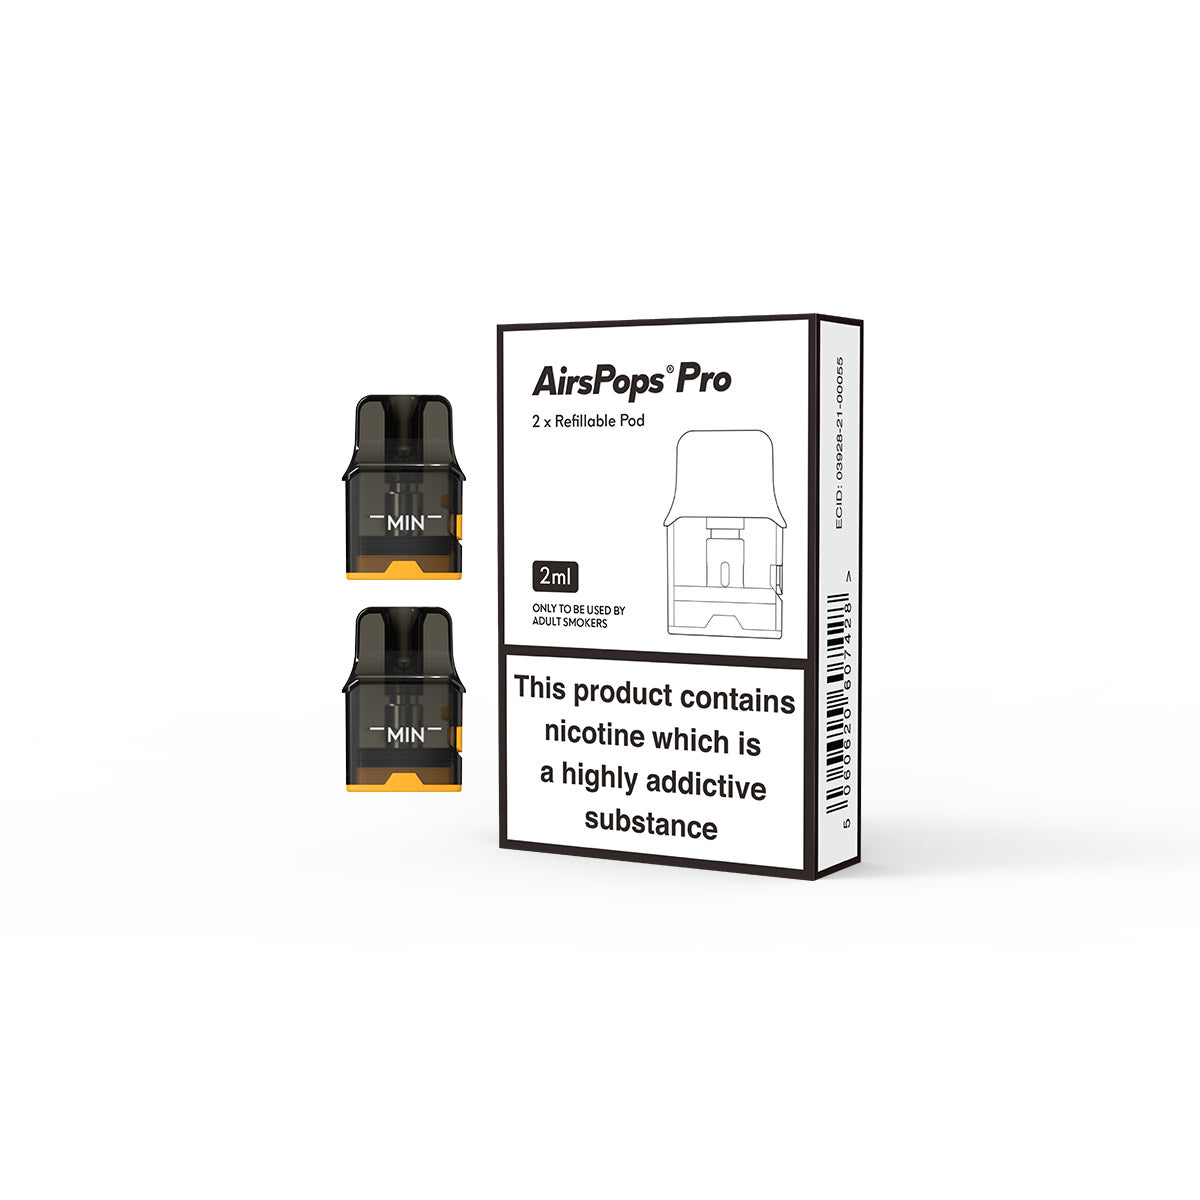 AirsPops Pro Refillable Pods